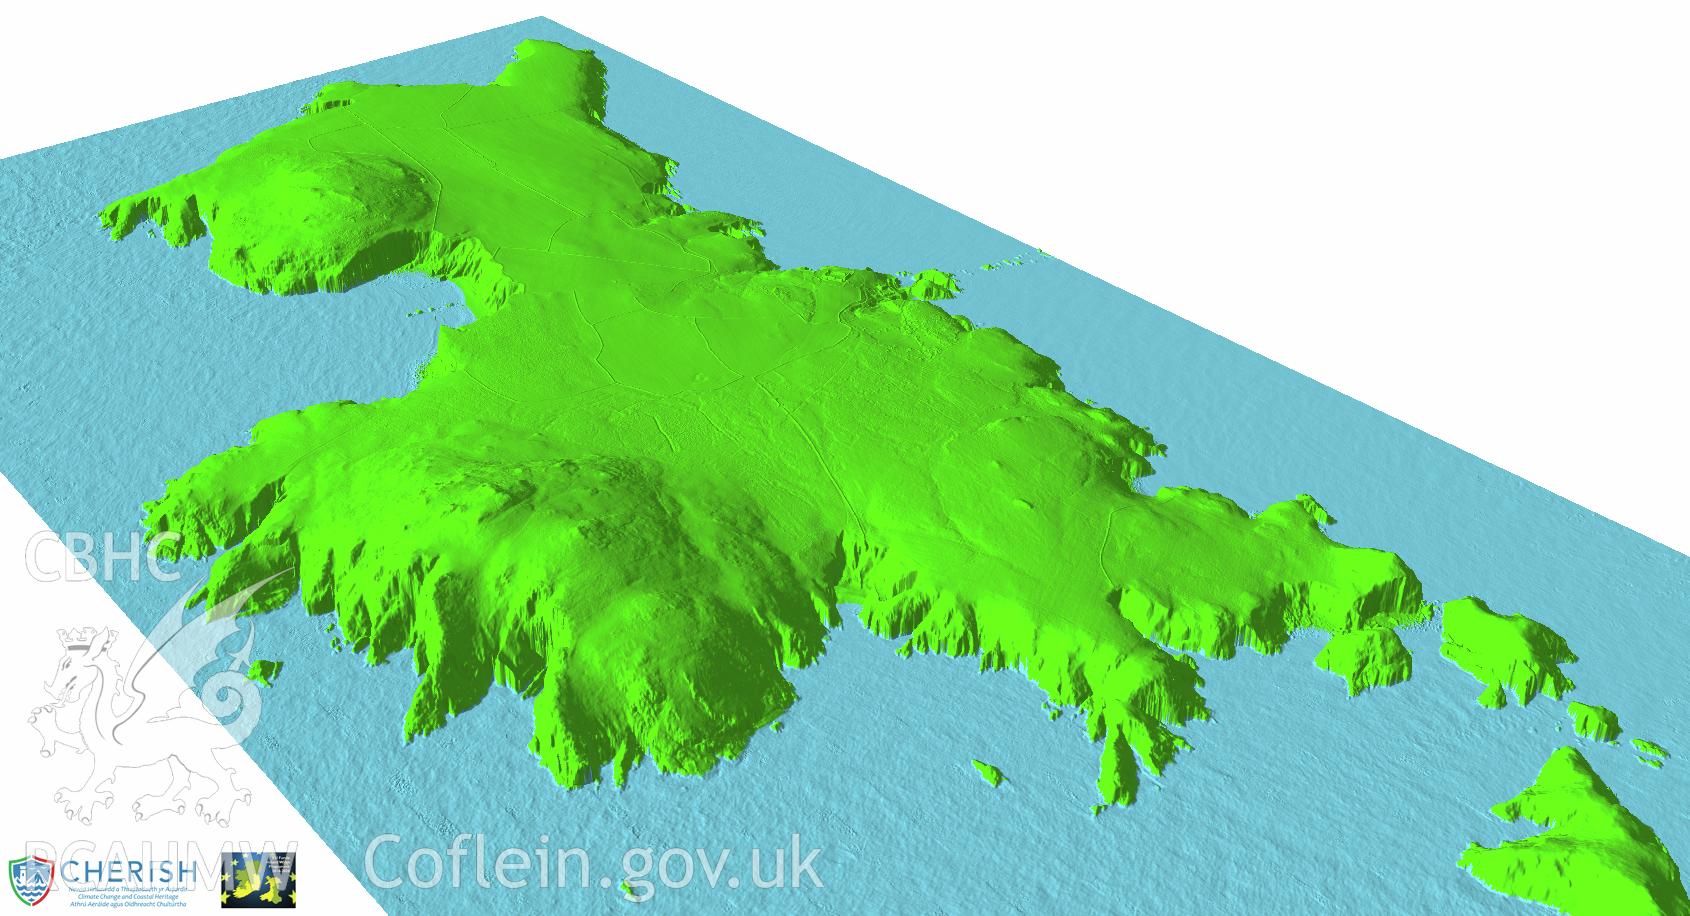 Ramsey Island. Airborne laser scanning (LiDAR) commissioned by the CHERISH Project 2017-2021, flown by Bluesky International LTD at low tide on 24th February 2017. View showing the island from the south-west